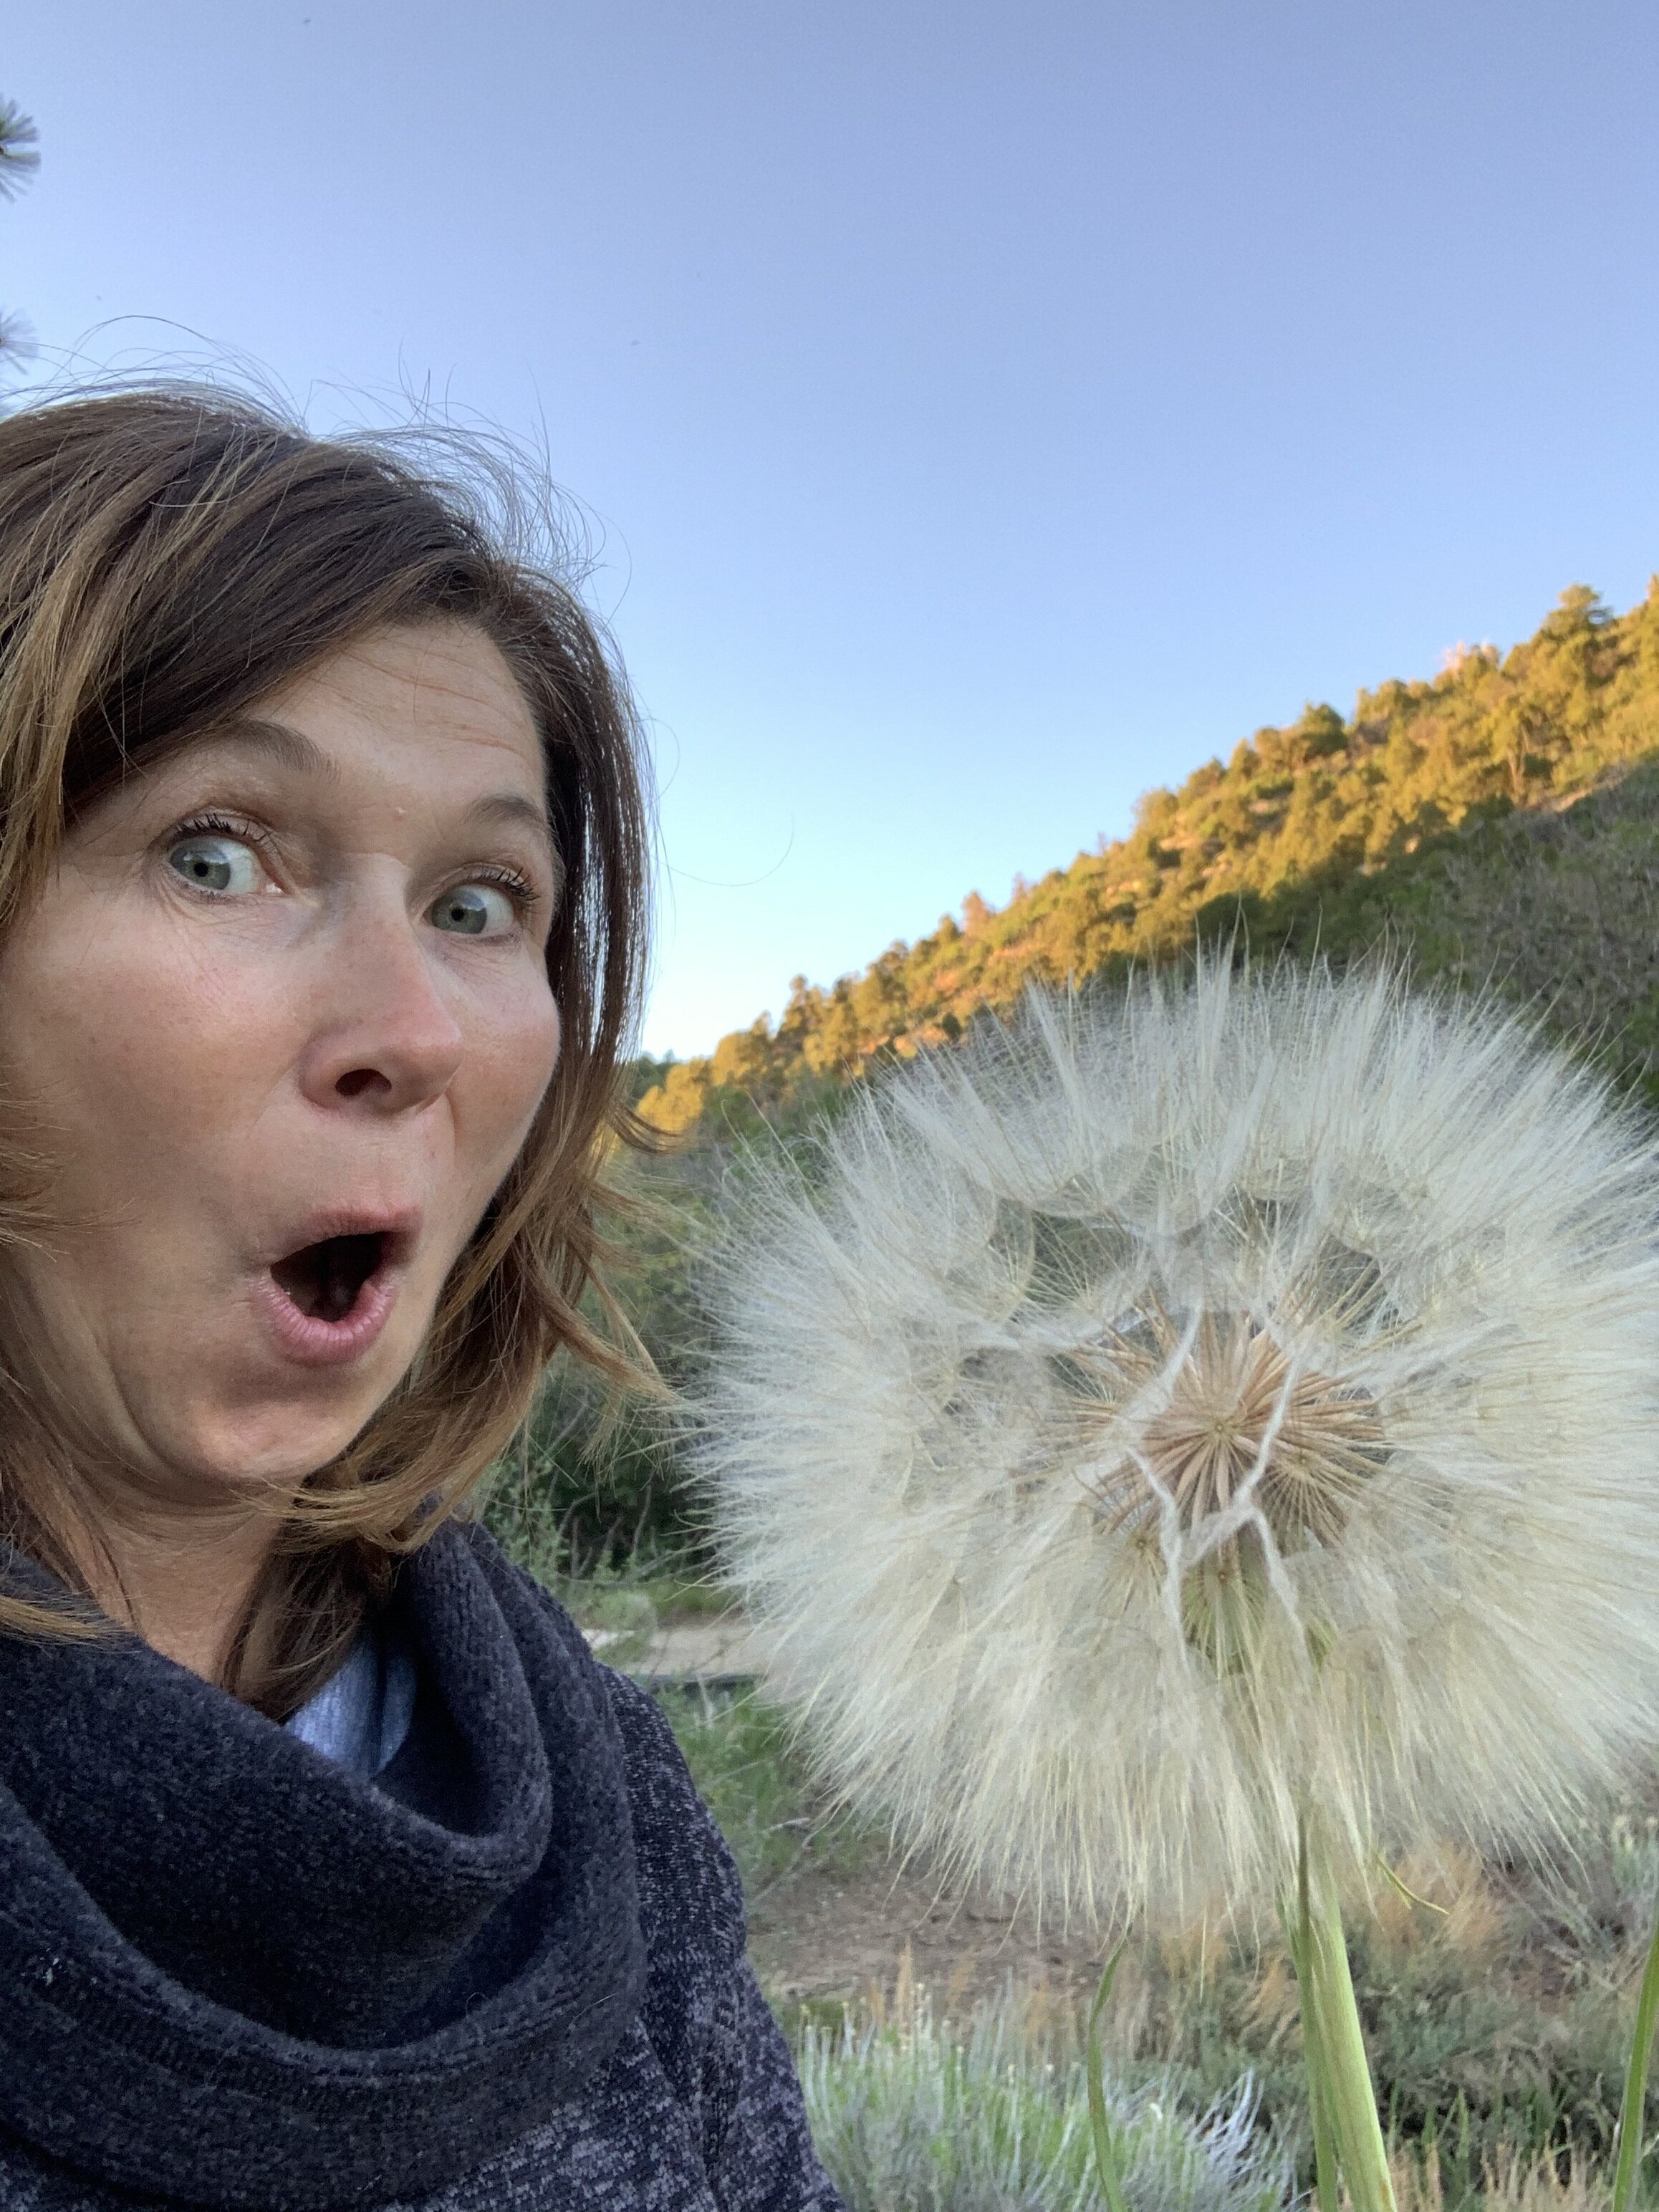  I was amazed to see in Colorado what seemed to be the biggest dandelions on the planet! This picture shows the true and actual size of this dandelion, for those that don’t see these mammoths every day. I tried to blow off the parachutes, but they wo